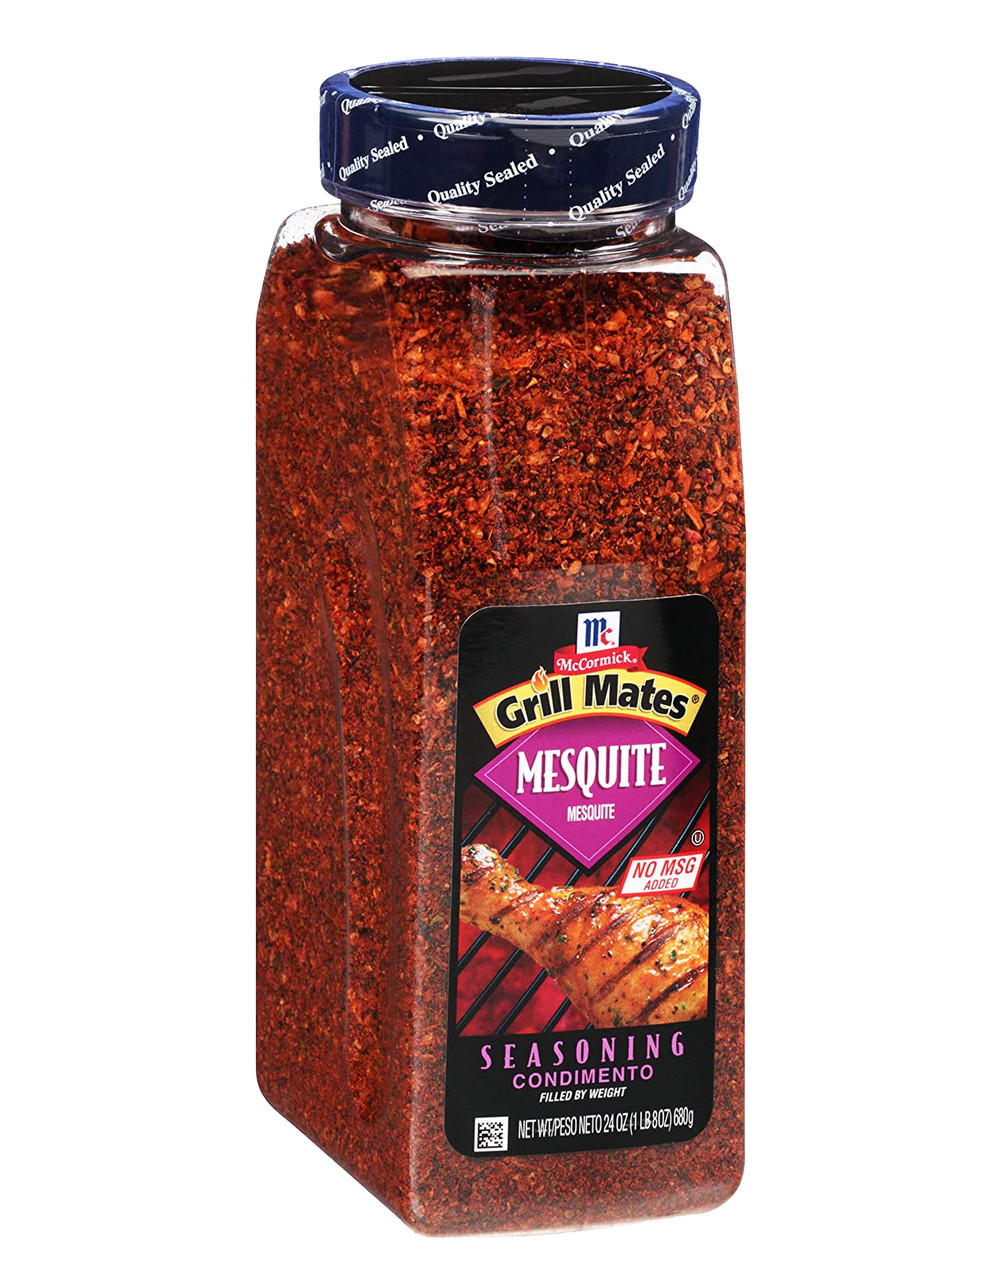 McCormick Grill Mates Mesquite Seasoning, 24 Ounce -- 6 per case. Free ...